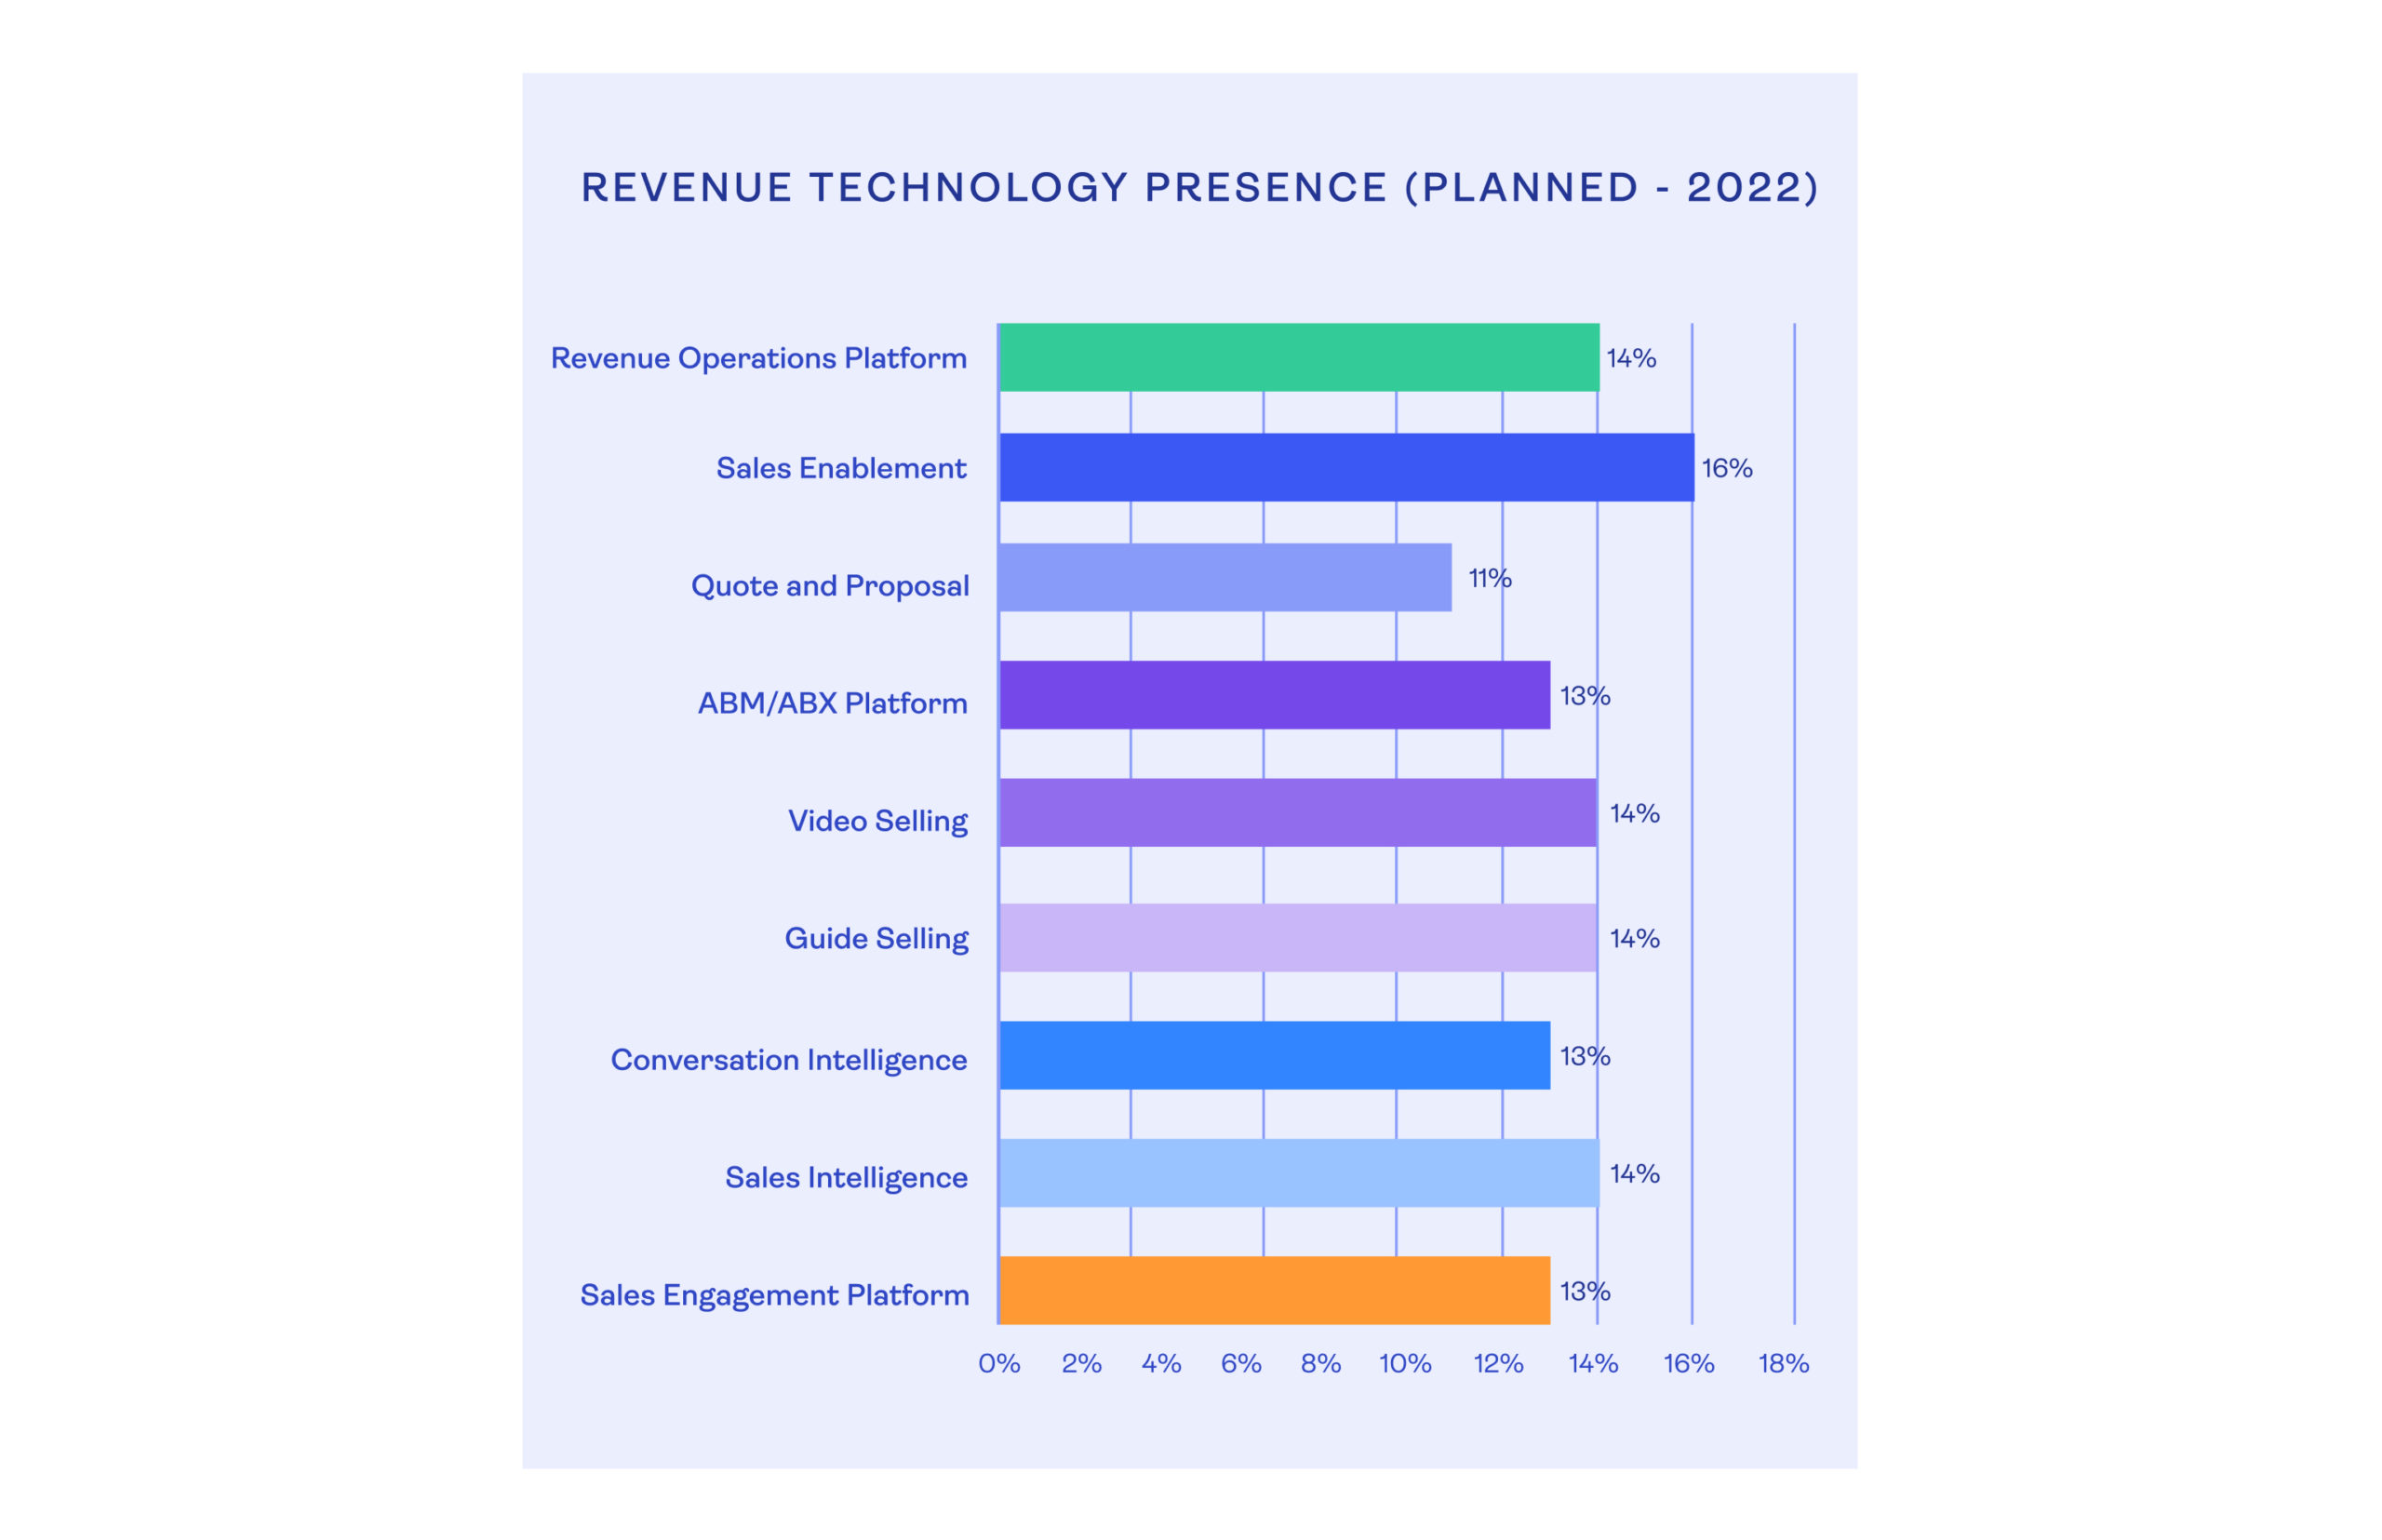 13% of B2B companies plan to buy a sales engagement platform in 2022